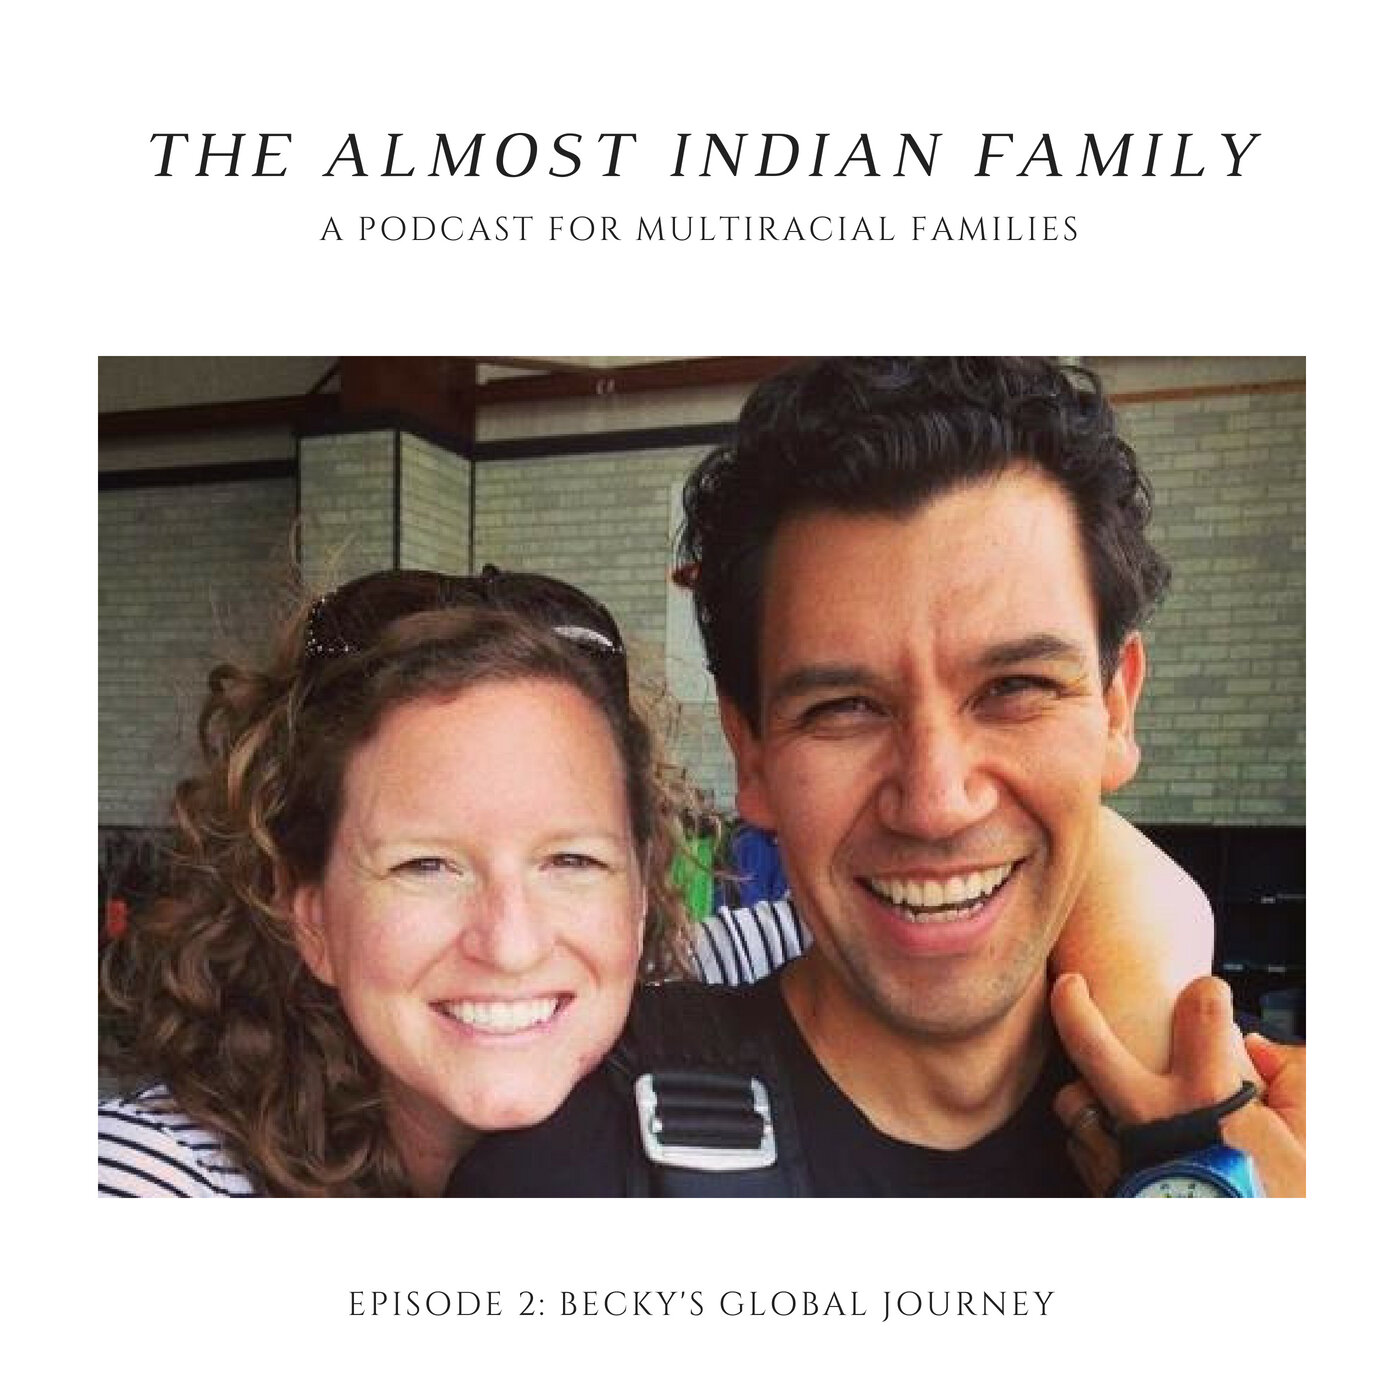 The Almost Indian Family Podcast: Episode 2 Becky's Global Journey